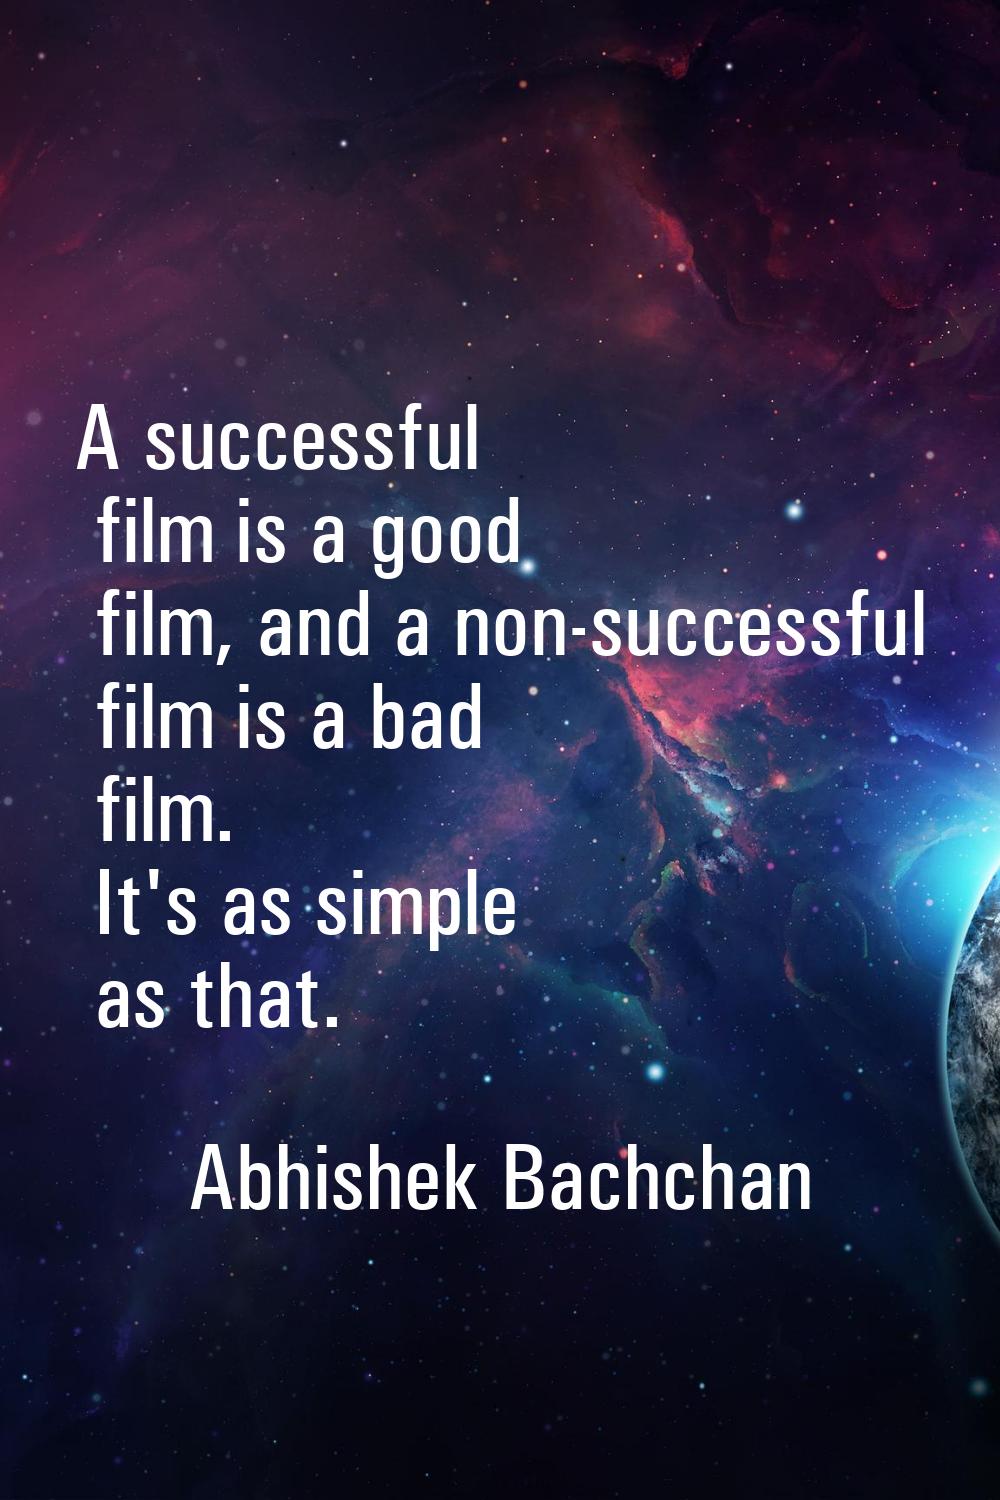 A successful film is a good film, and a non-successful film is a bad film. It's as simple as that.